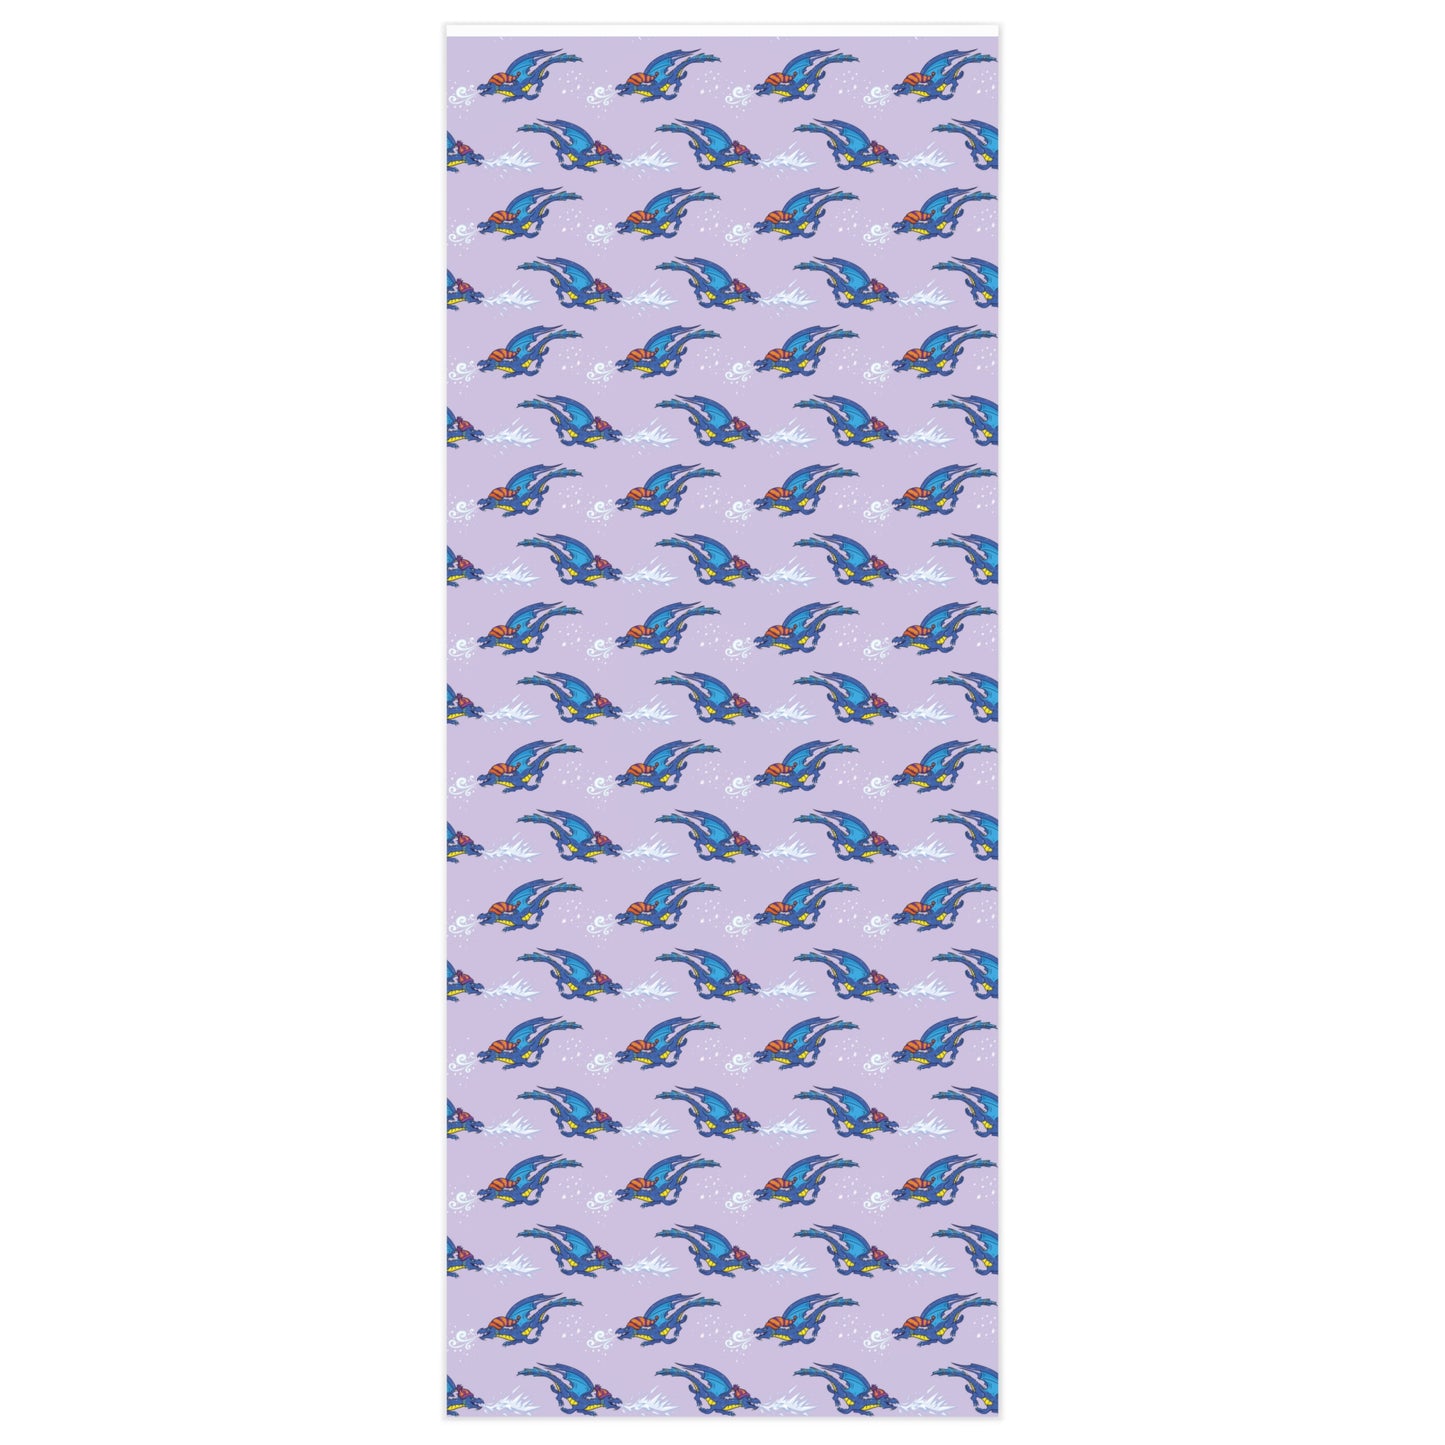 "Winter Dragon" in Lavender - Wrapping Paper (2 sizes)